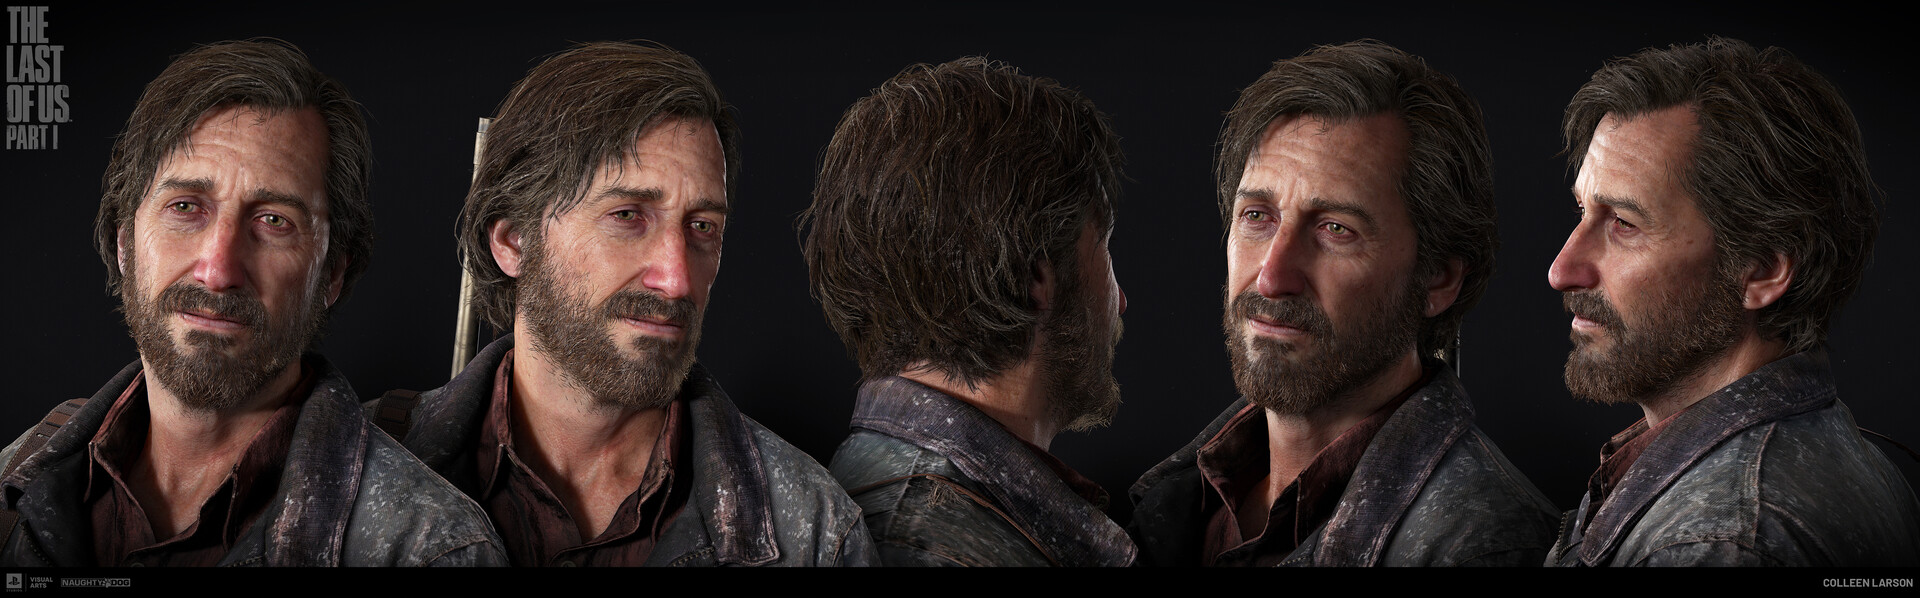 Naughty Dog confirms Last of Us Part 1 graphics modes & PS5 exclusive  features - Dexerto